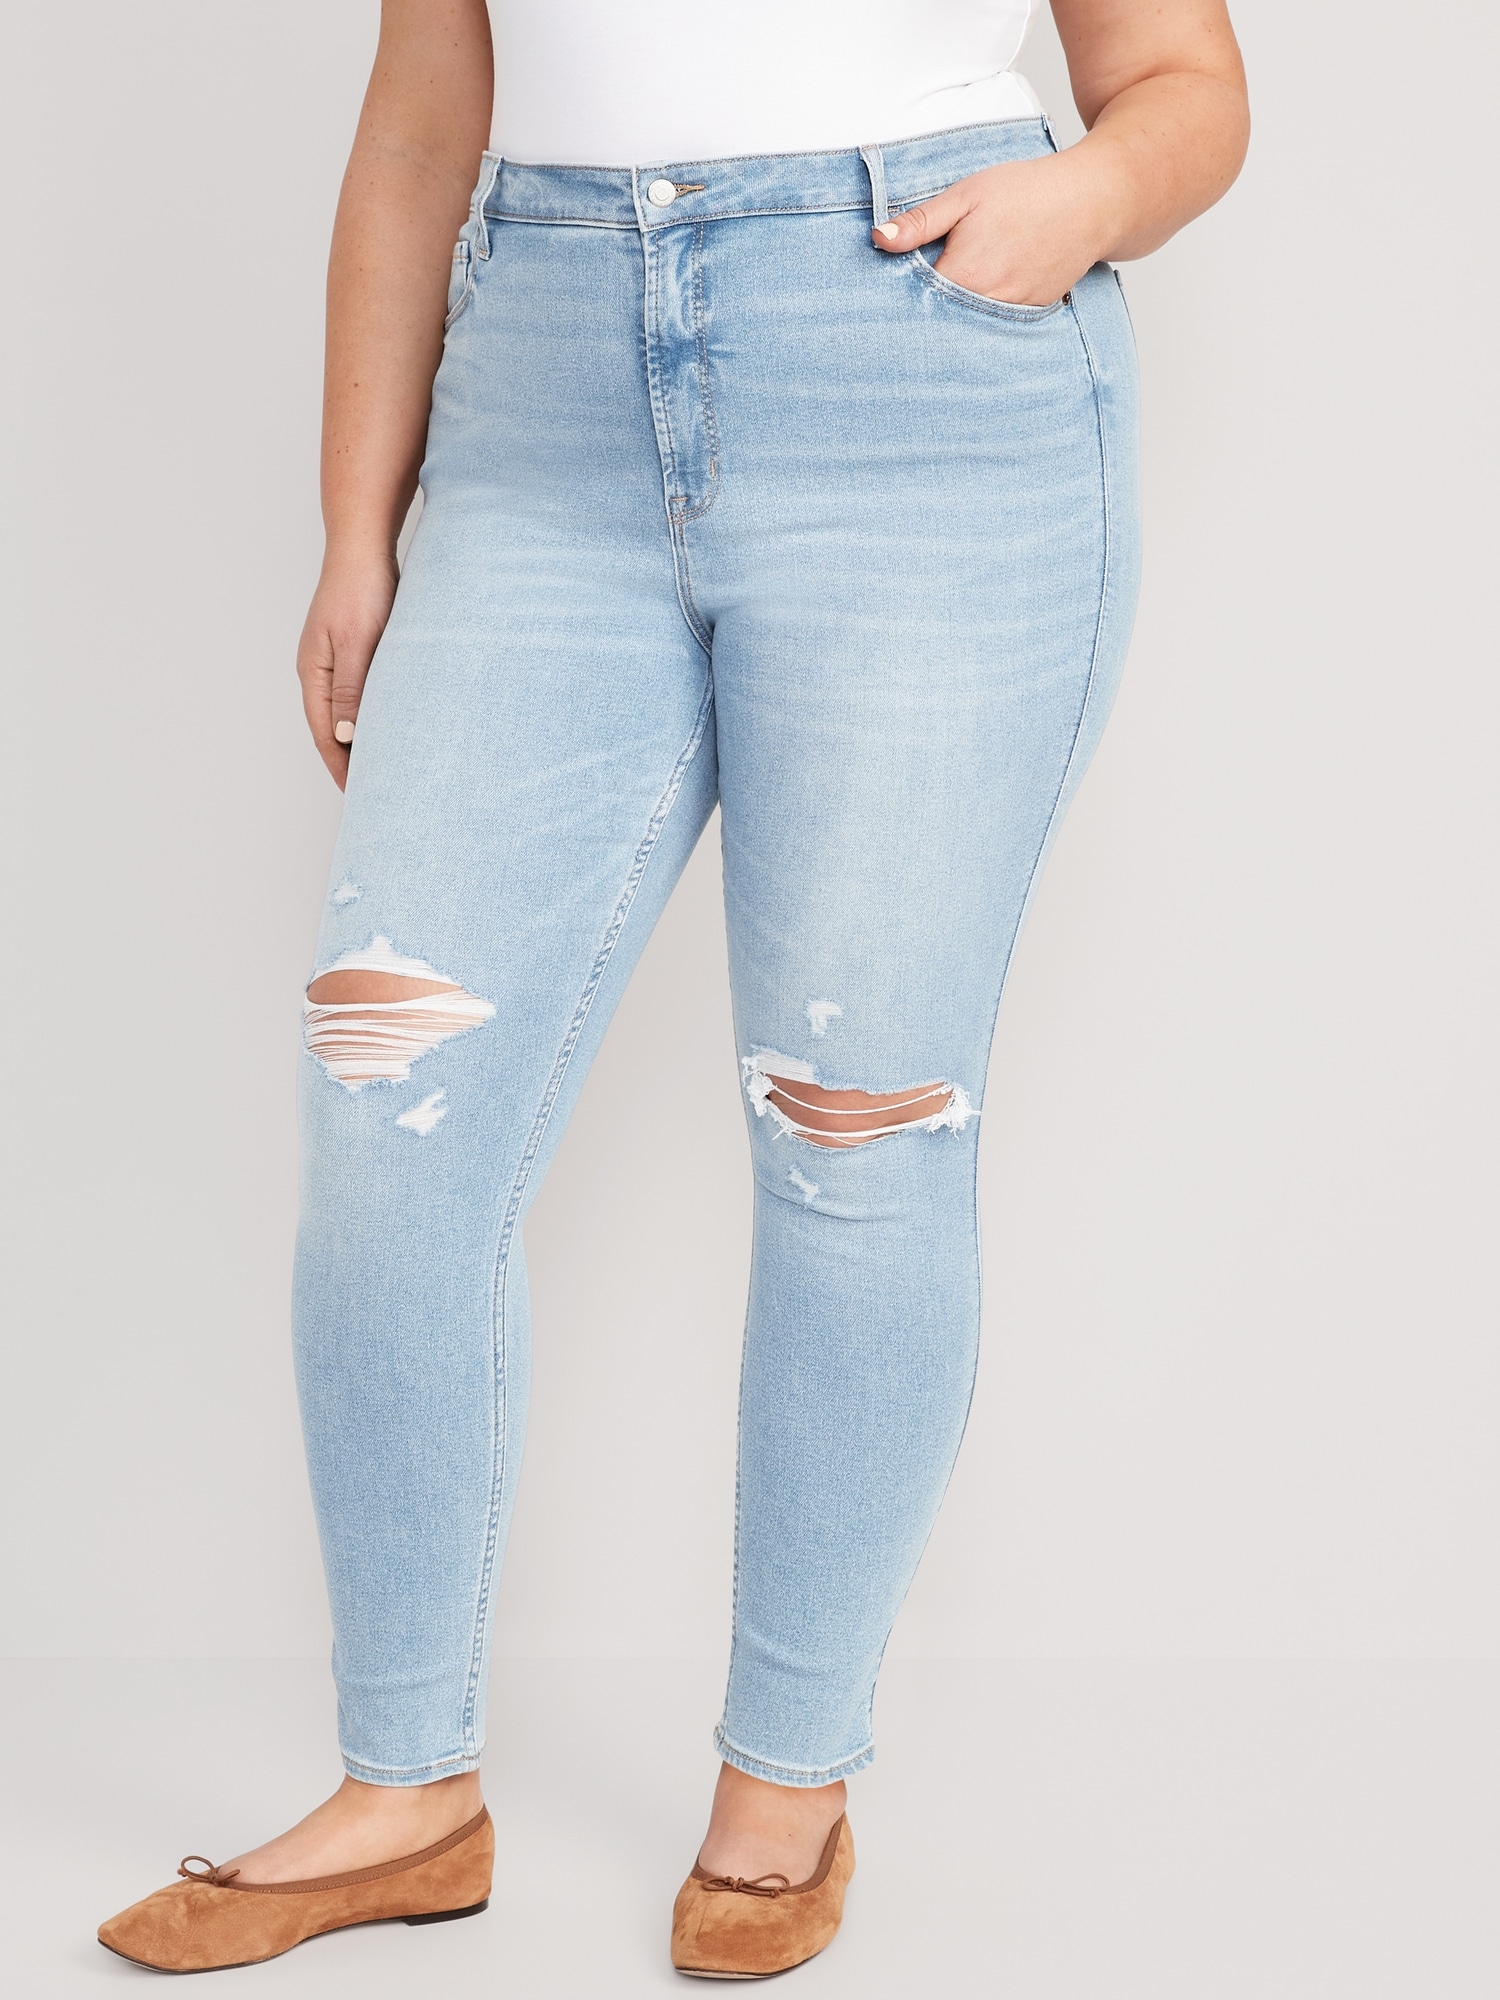 Extra Stretch Jeans Old Women | Navy 360° High-Waisted Rockstar for Super-Skinny